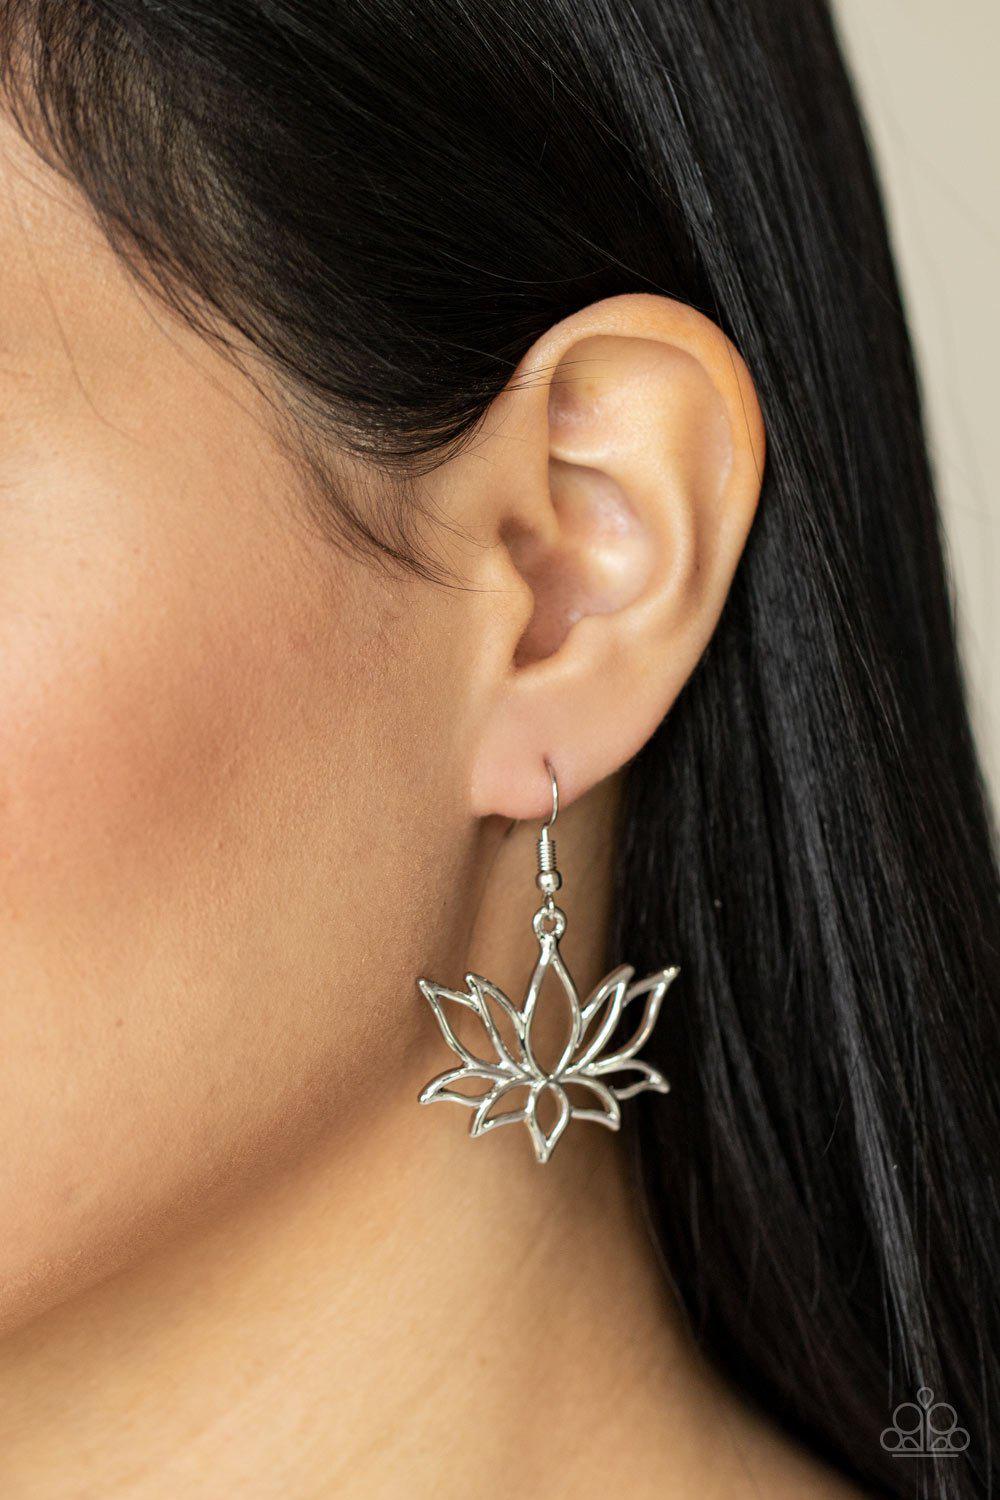 Lotus Ponds Silver Flower Earrings - Paparazzi Accessories - model -CarasShop.com - $5 Jewelry by Cara Jewels